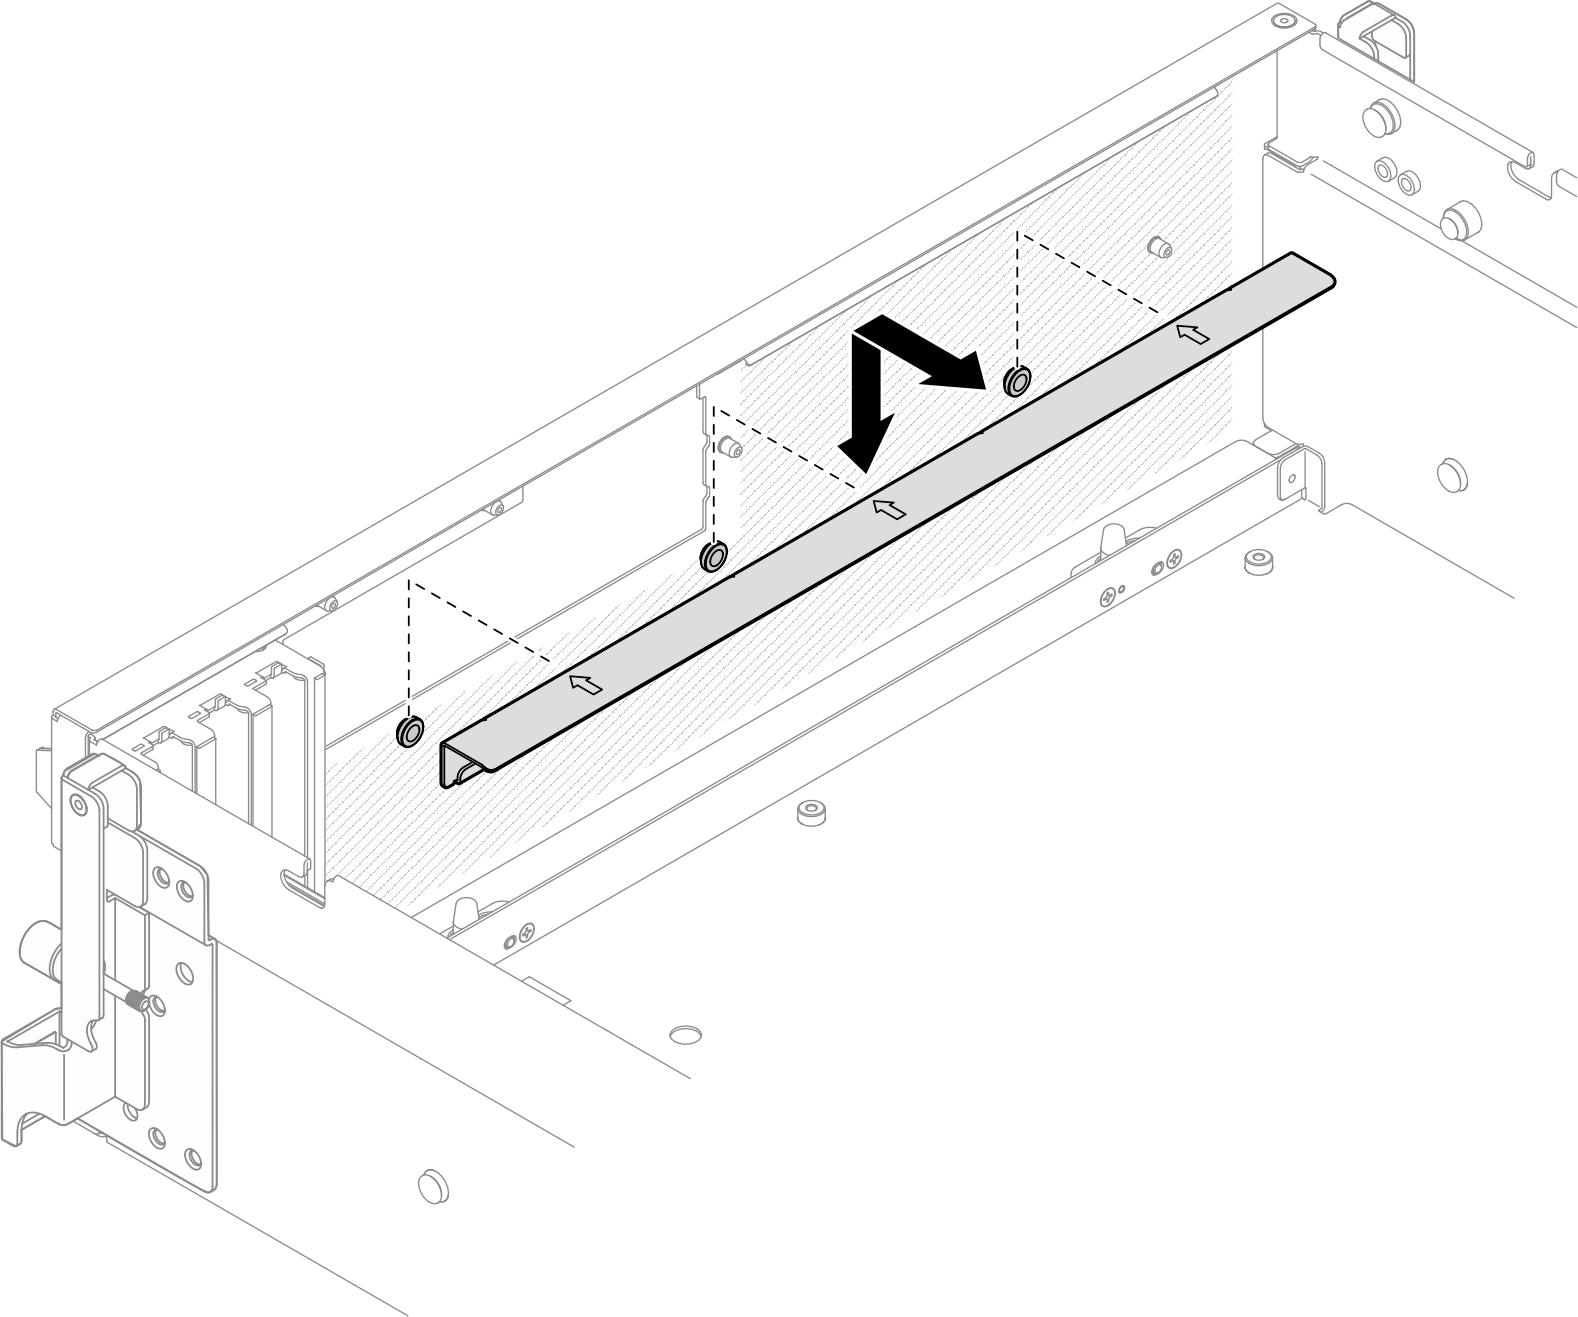 Front drive tray support bracket installation